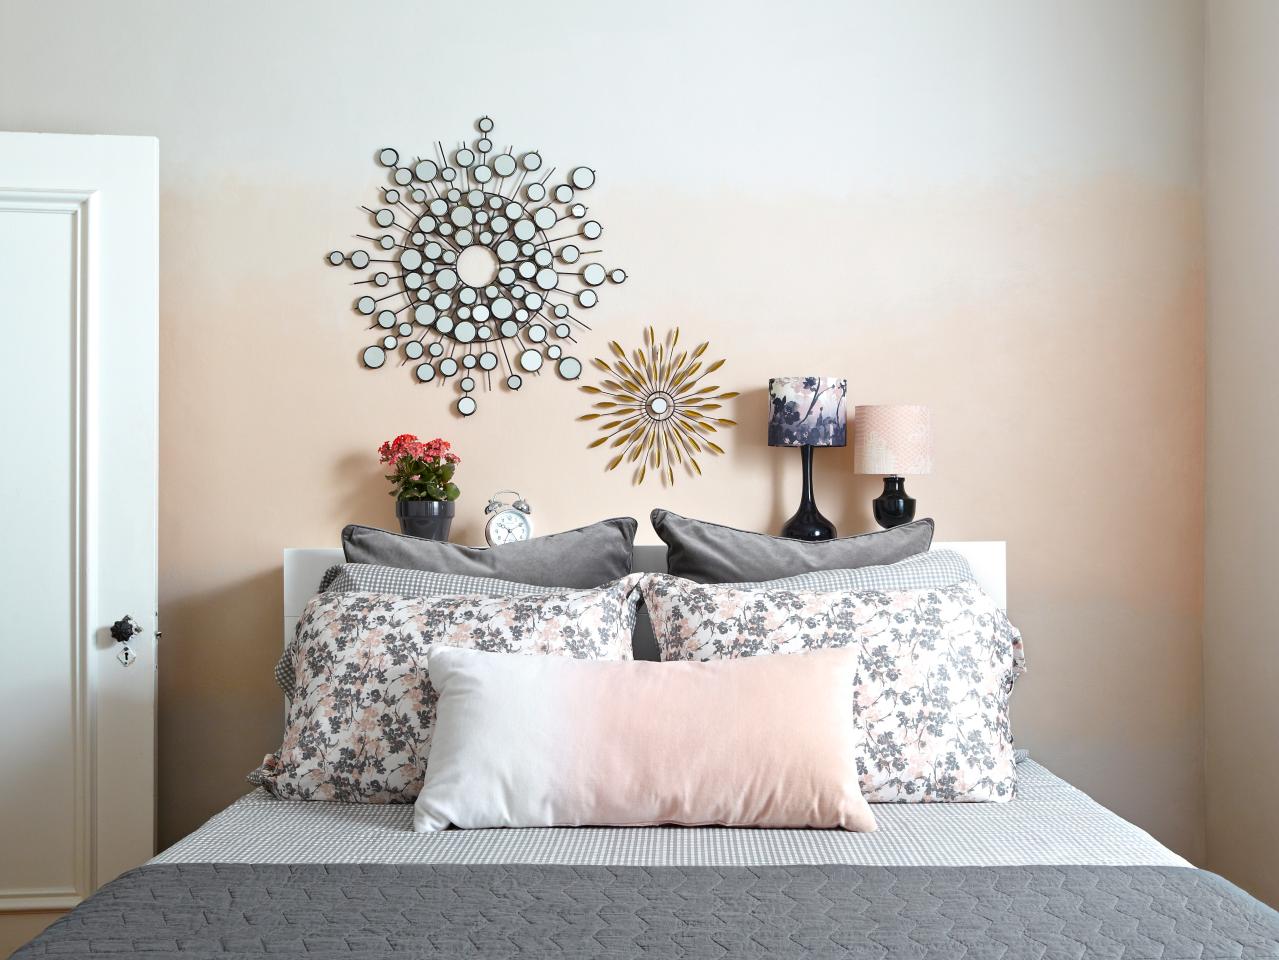 How to Paint an Ombre Accent Wall howtos DIY